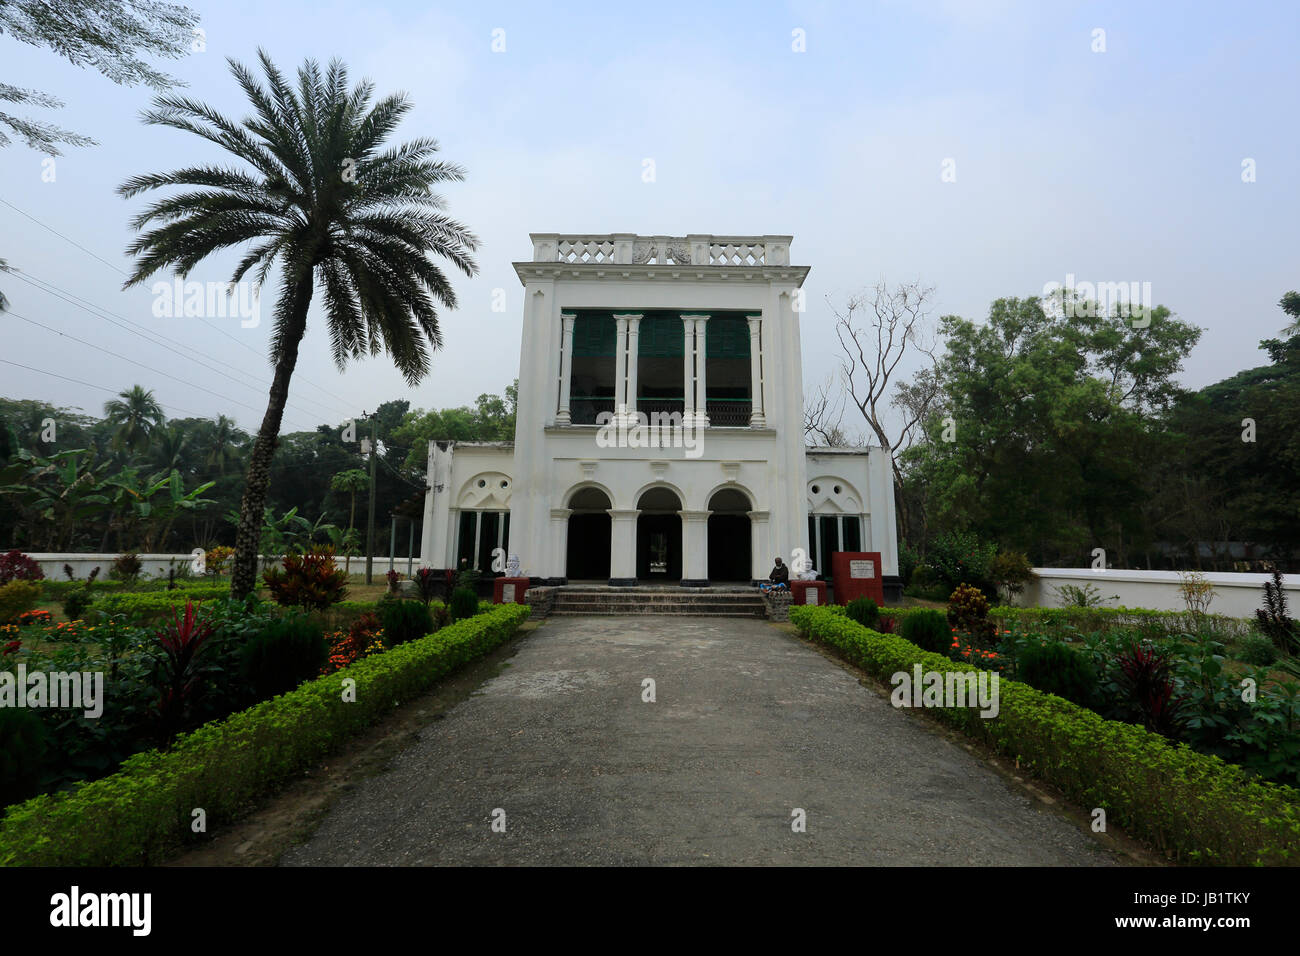 The 114-year-old two-stored building of Rabindranath Tagore's father-in-law at Dakkhindihi in Phultala Upazila. Khulna, Bangladesh Stock Photo